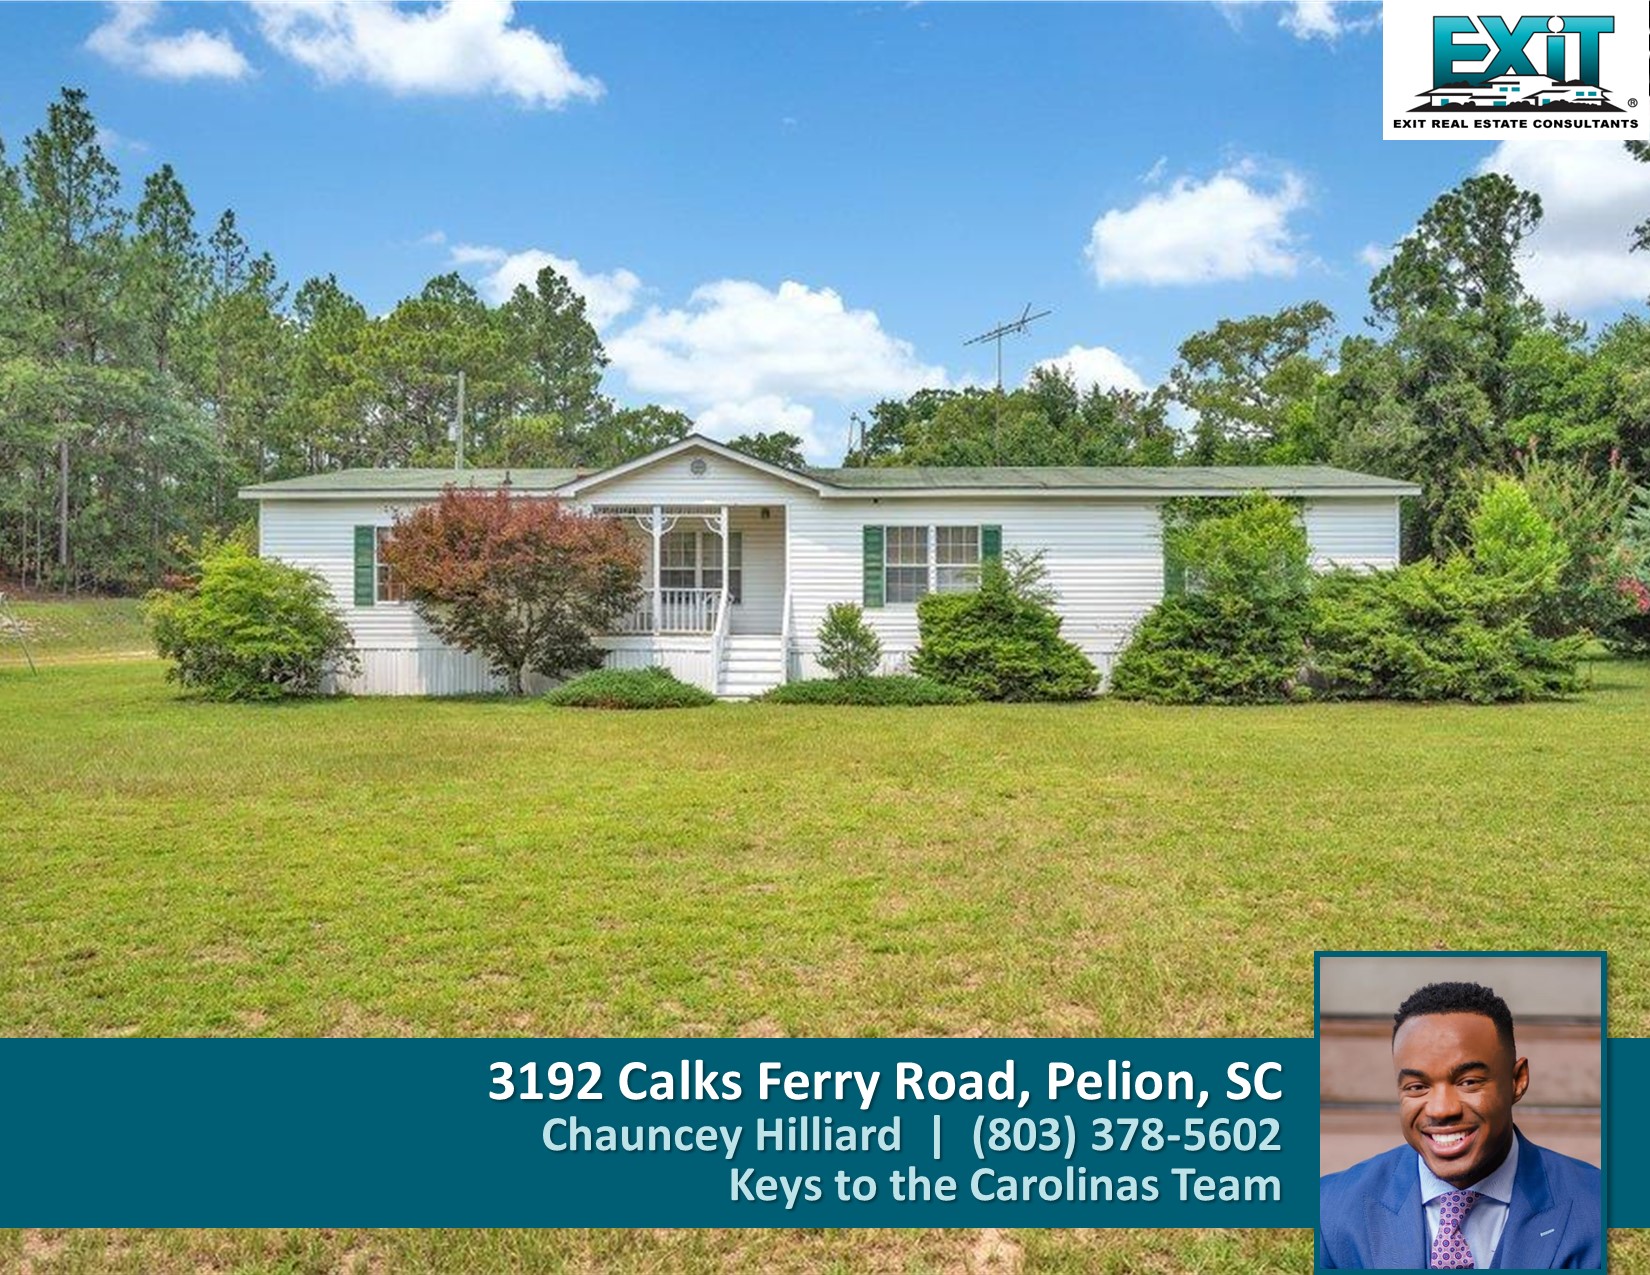 Just listed in Pelion